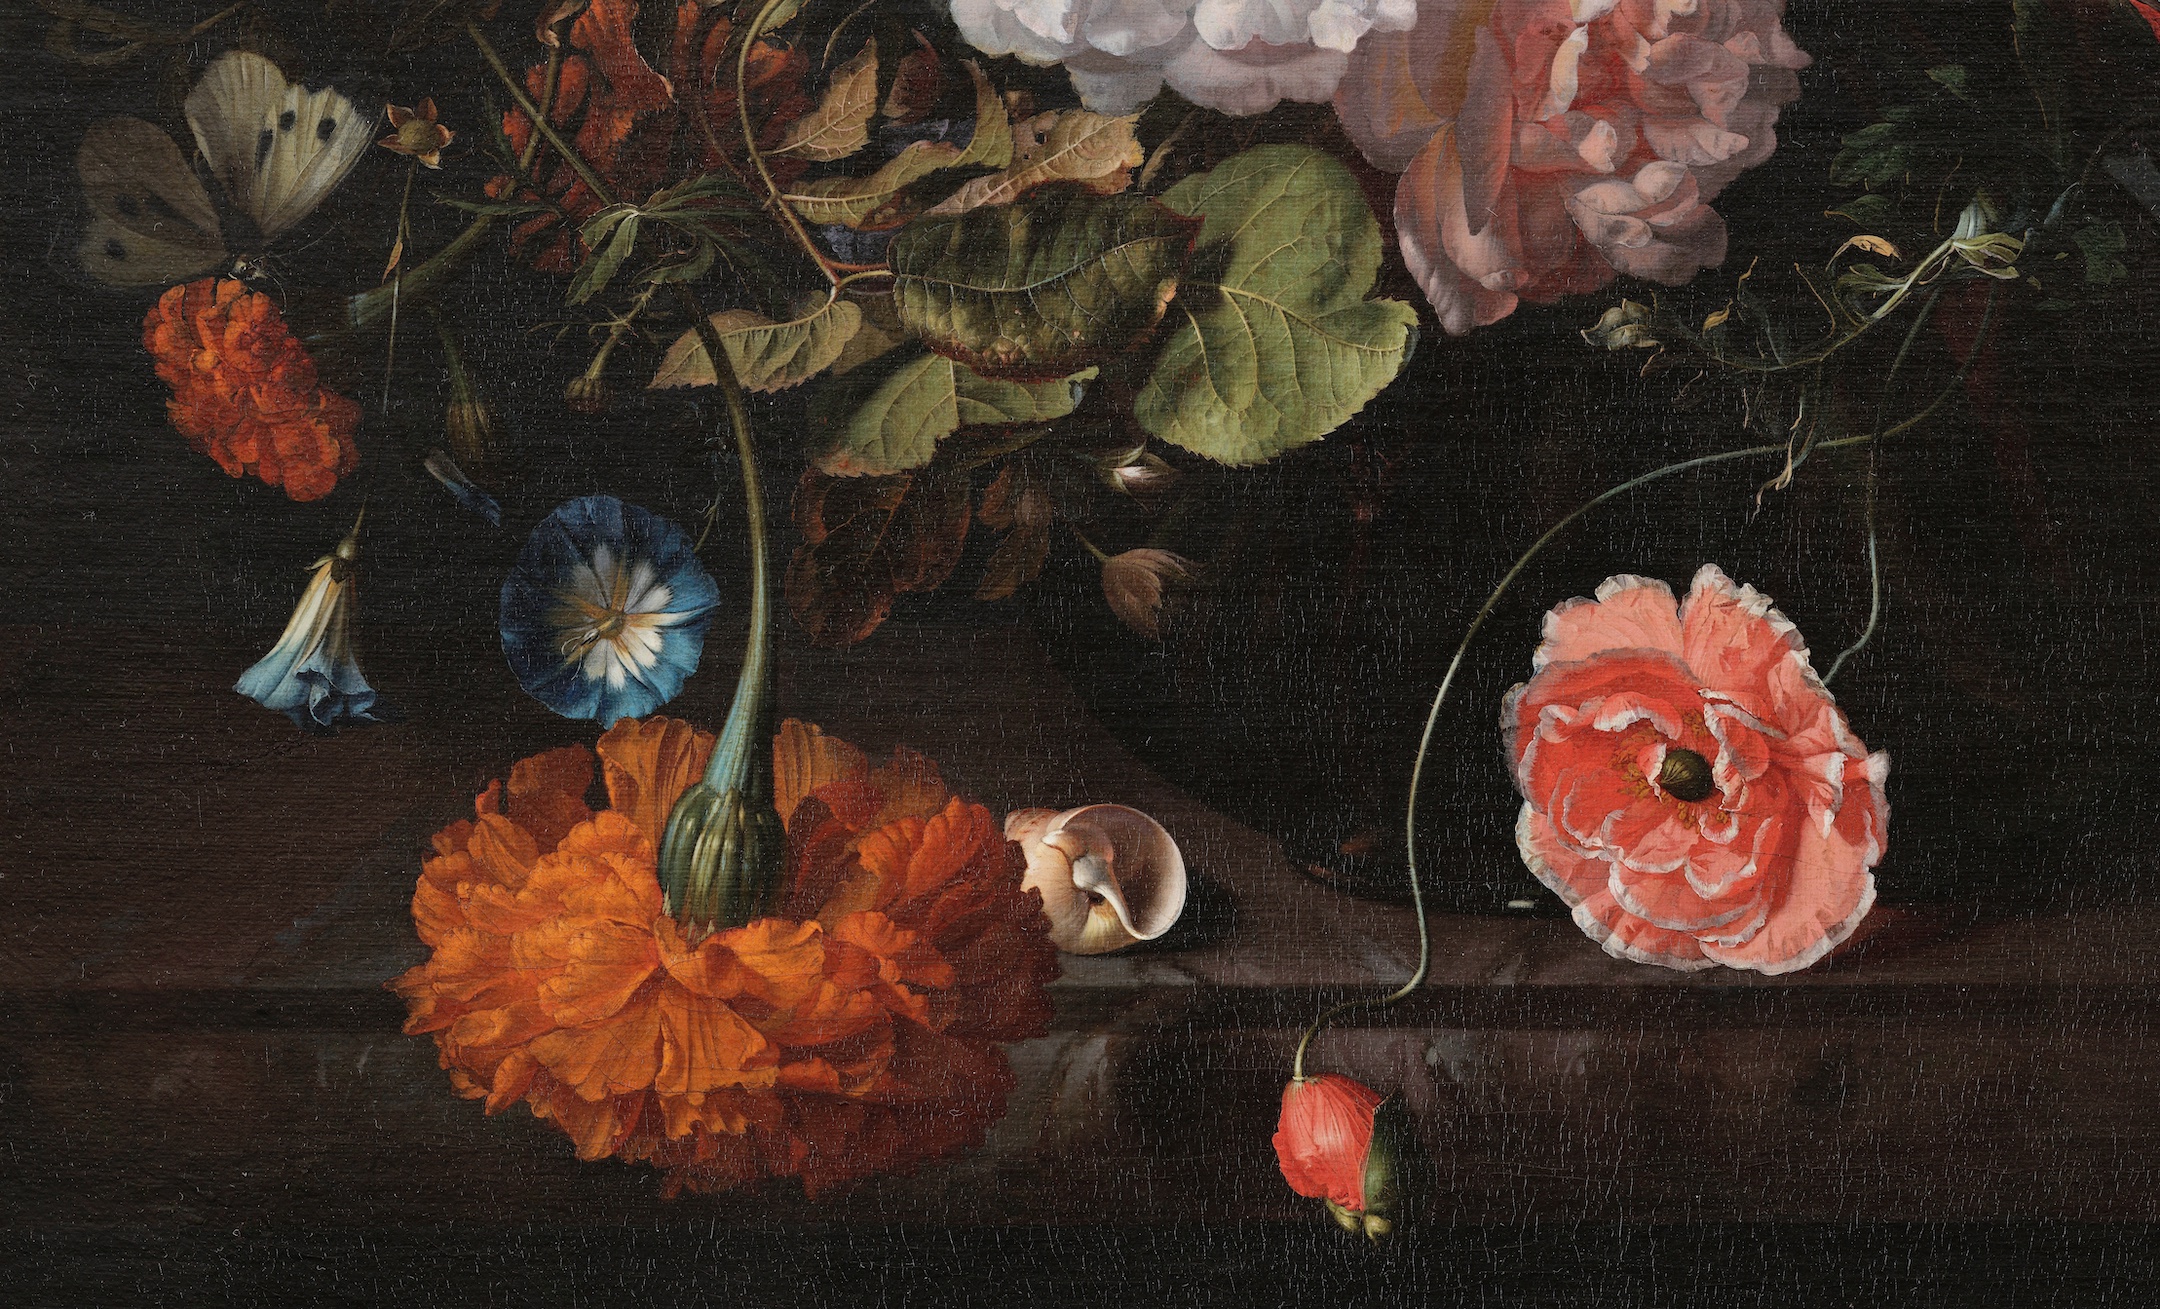 A drooping marigold and other flowers spilling out of the vase (detail), Rachel Ruysch, Flower Still Life, c. 1726, oil on canvas, 75.6 x 60.6 cm (Toledo Museum of Art, Ohio)